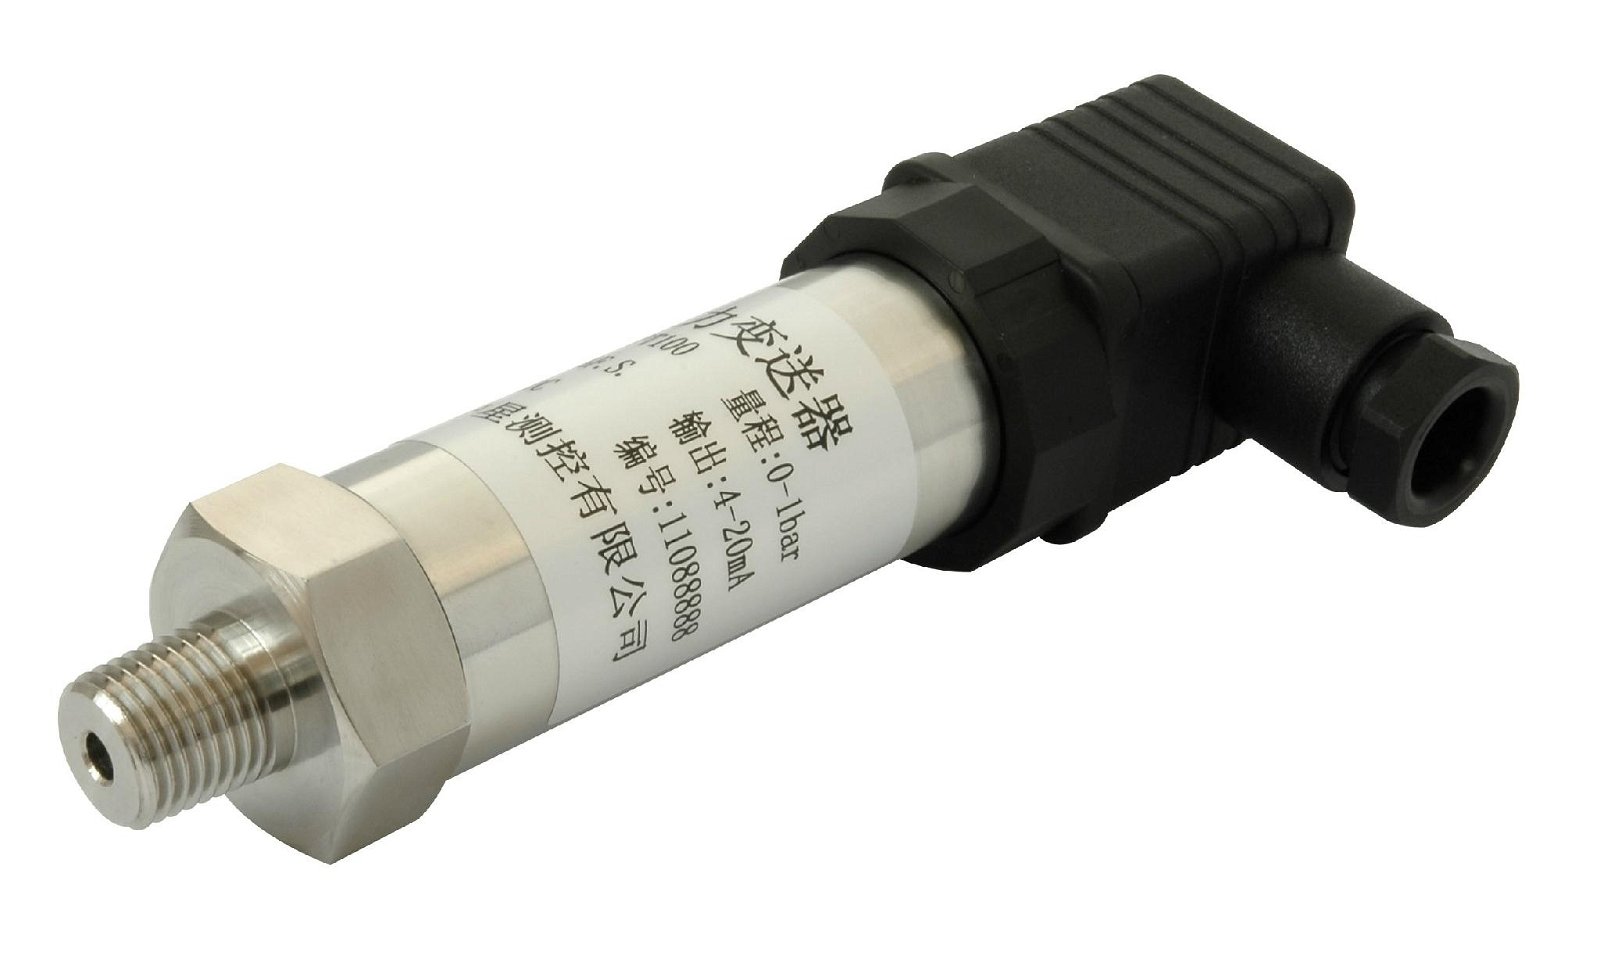 Pressure transmitter CS-PT100 with competitive price based